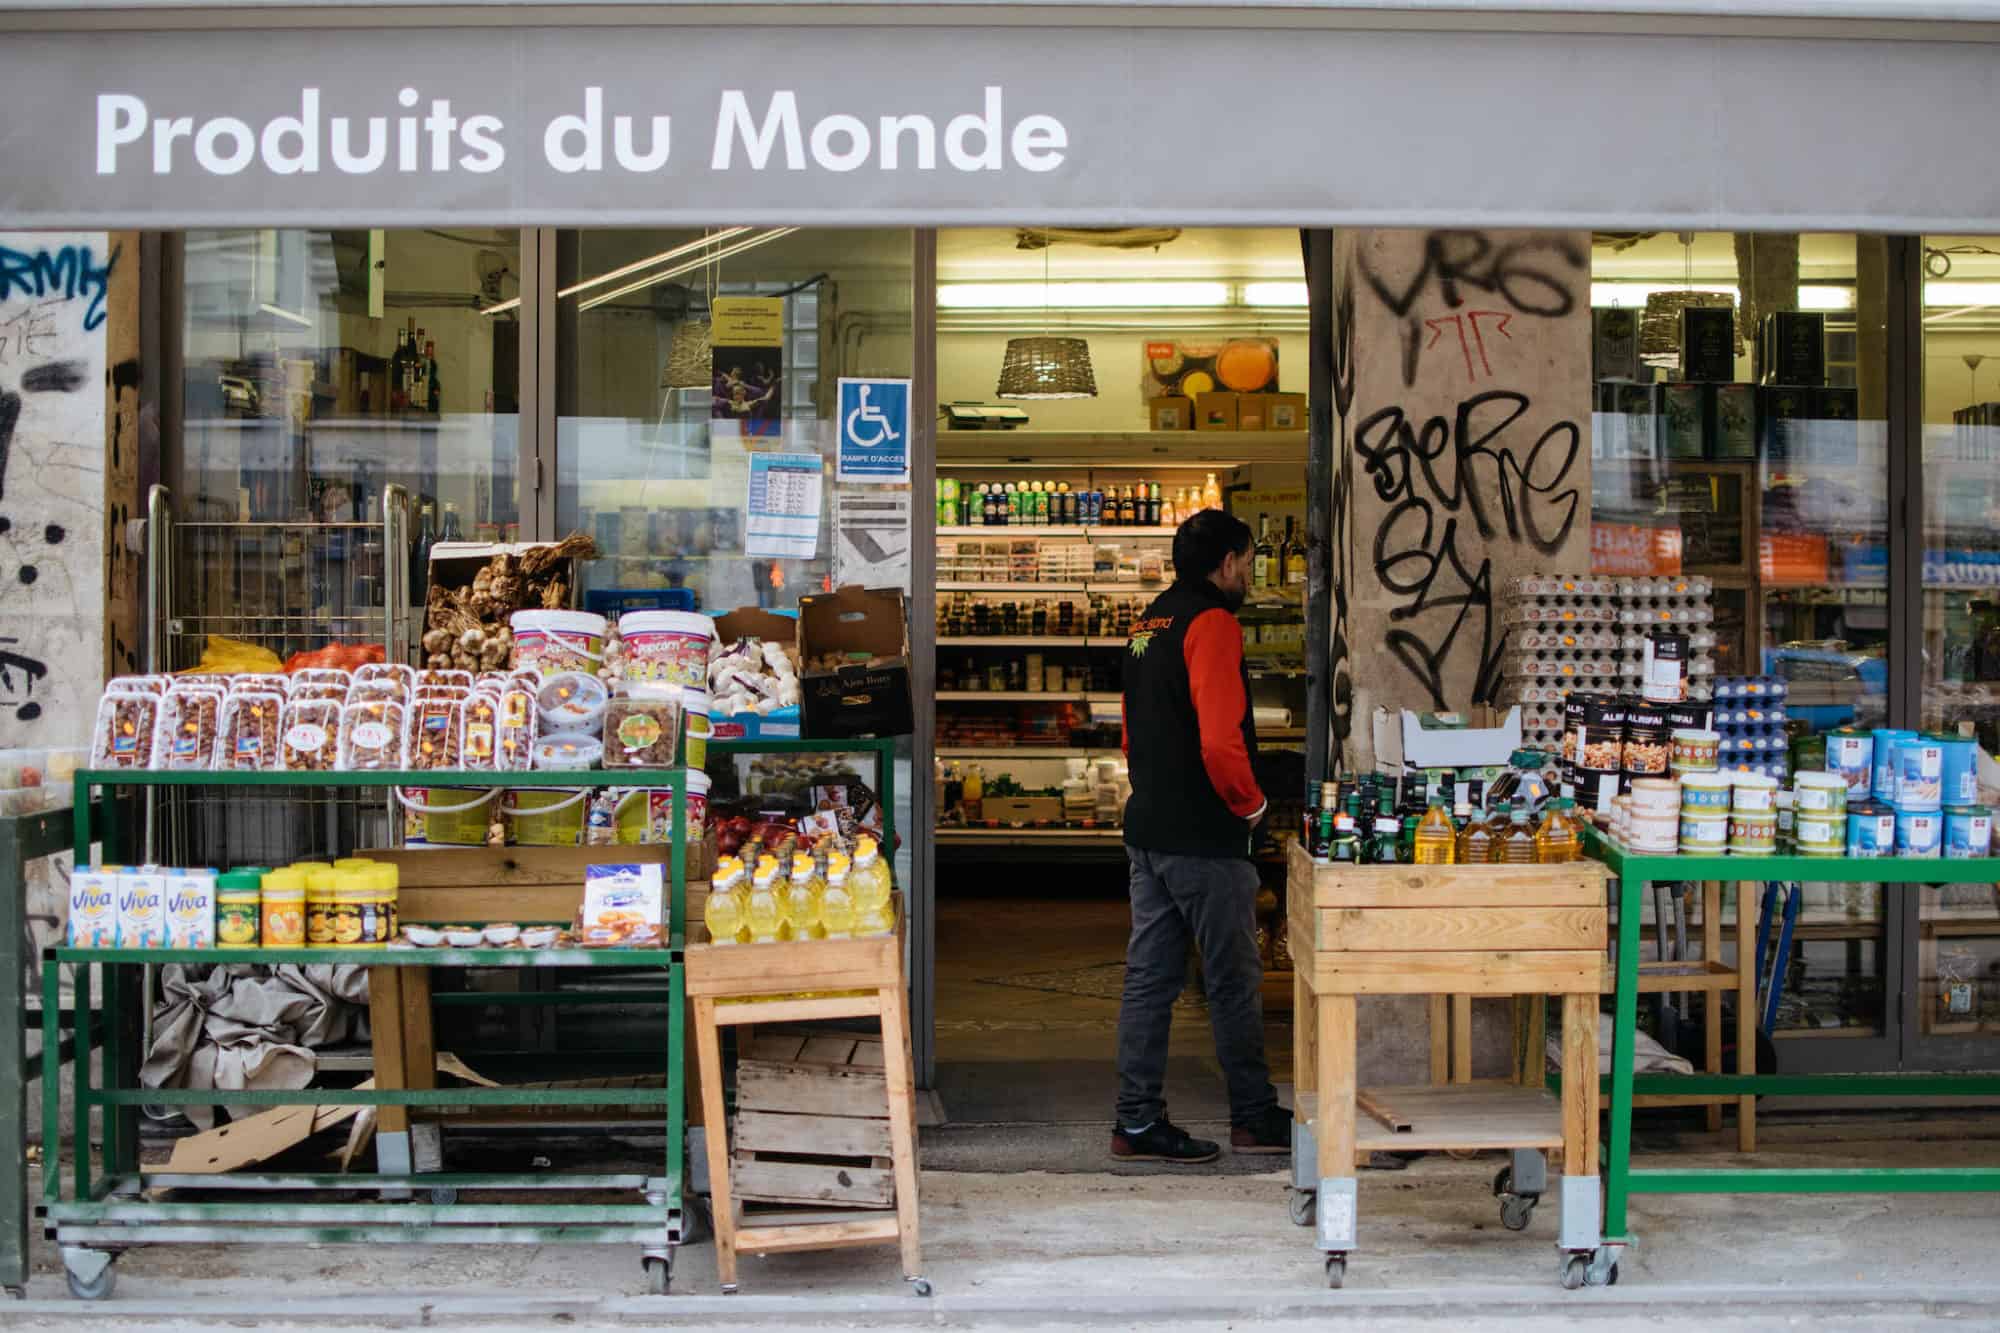 Ingredients and food products are lined up in front of Produits du Monde, a Middle Eastern épicerie (small grocery store) in Paris.